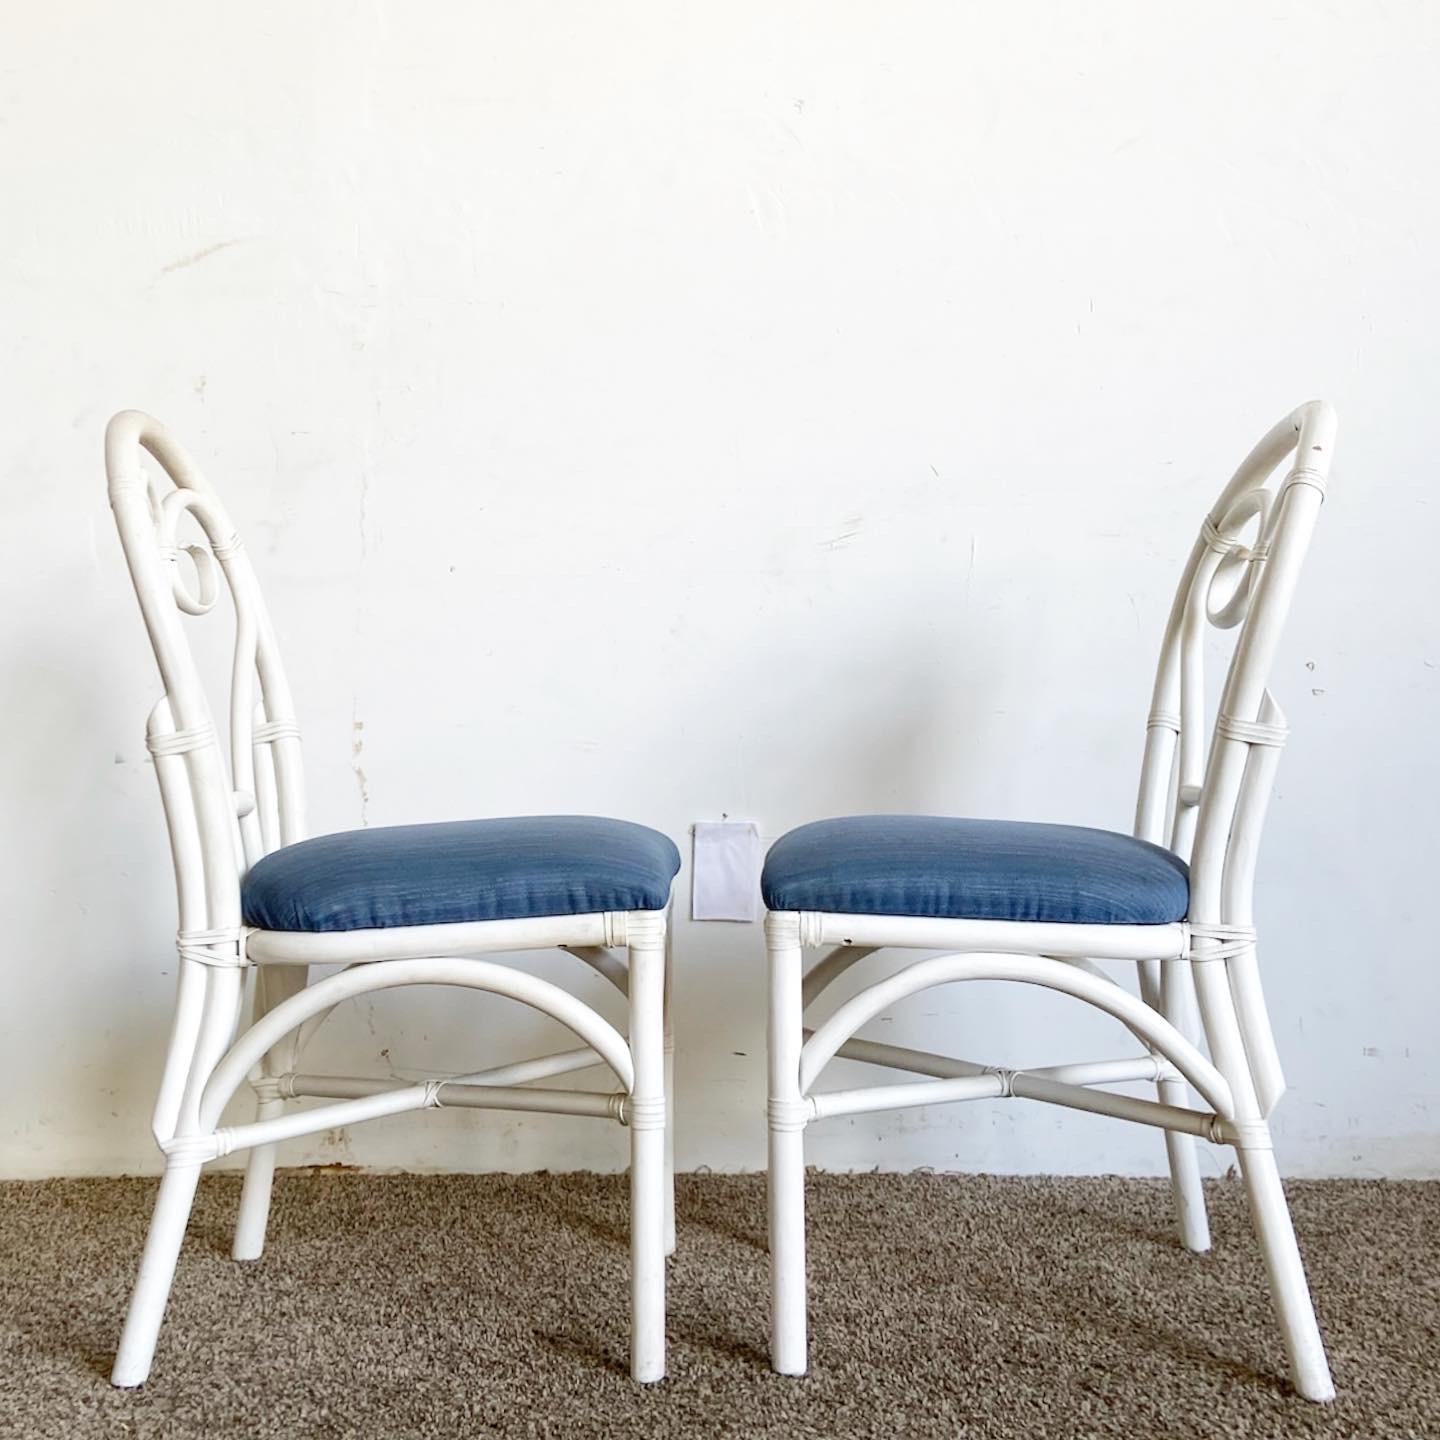 Boho Chic White Sculpted Bamboo Rattan Dining Chairs - Set of 4 In Good Condition For Sale In Delray Beach, FL